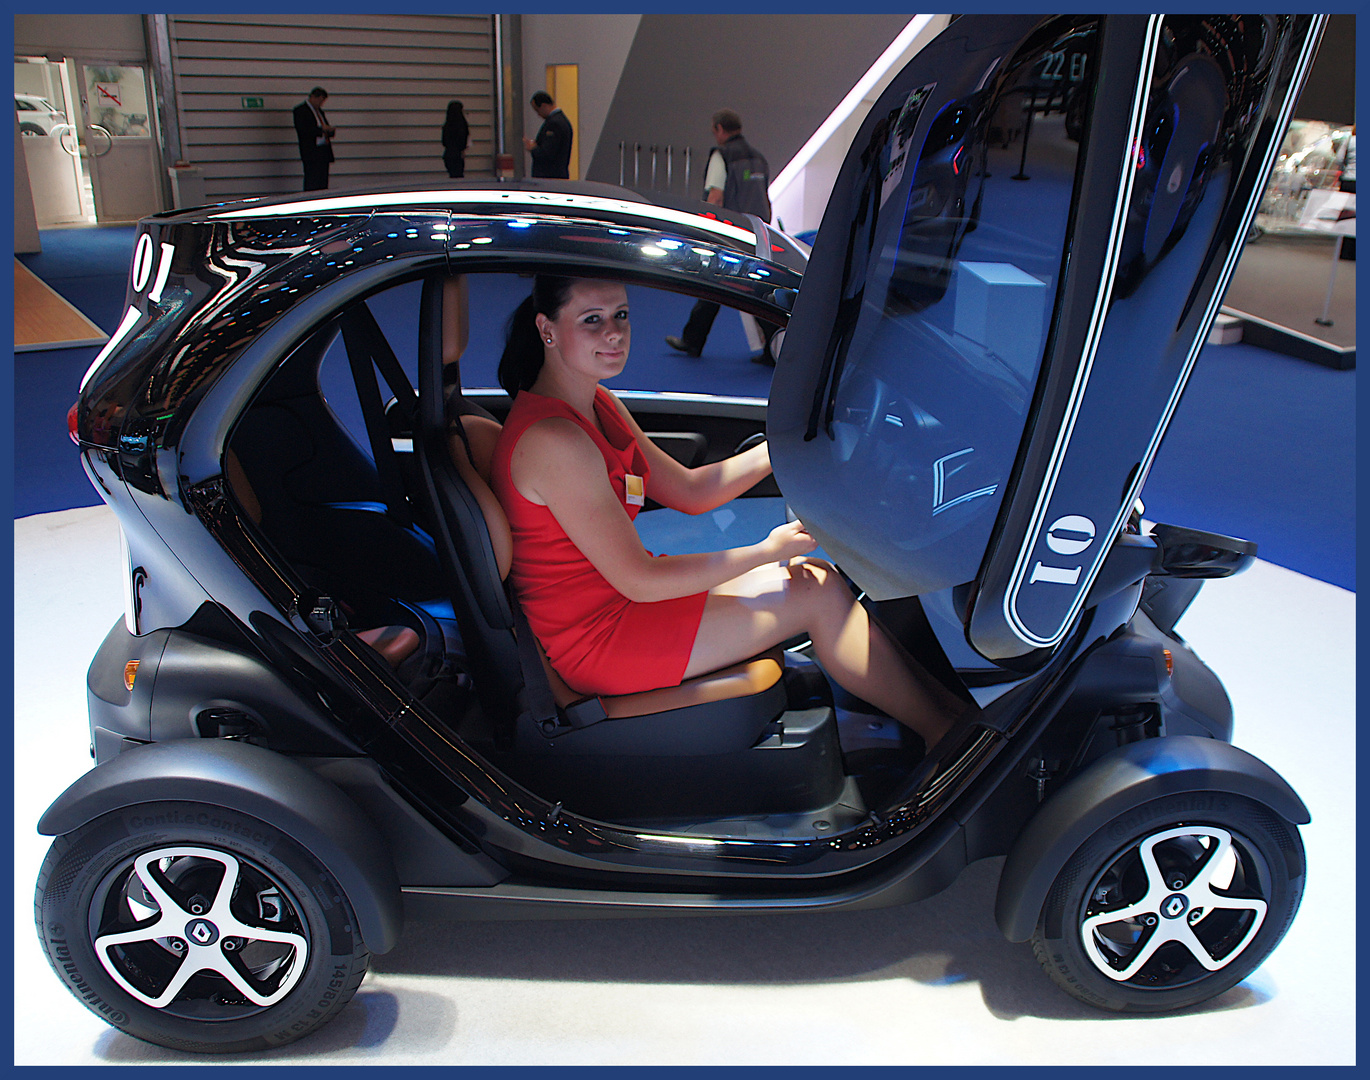 Over and out: Renault Twizy Z.E.